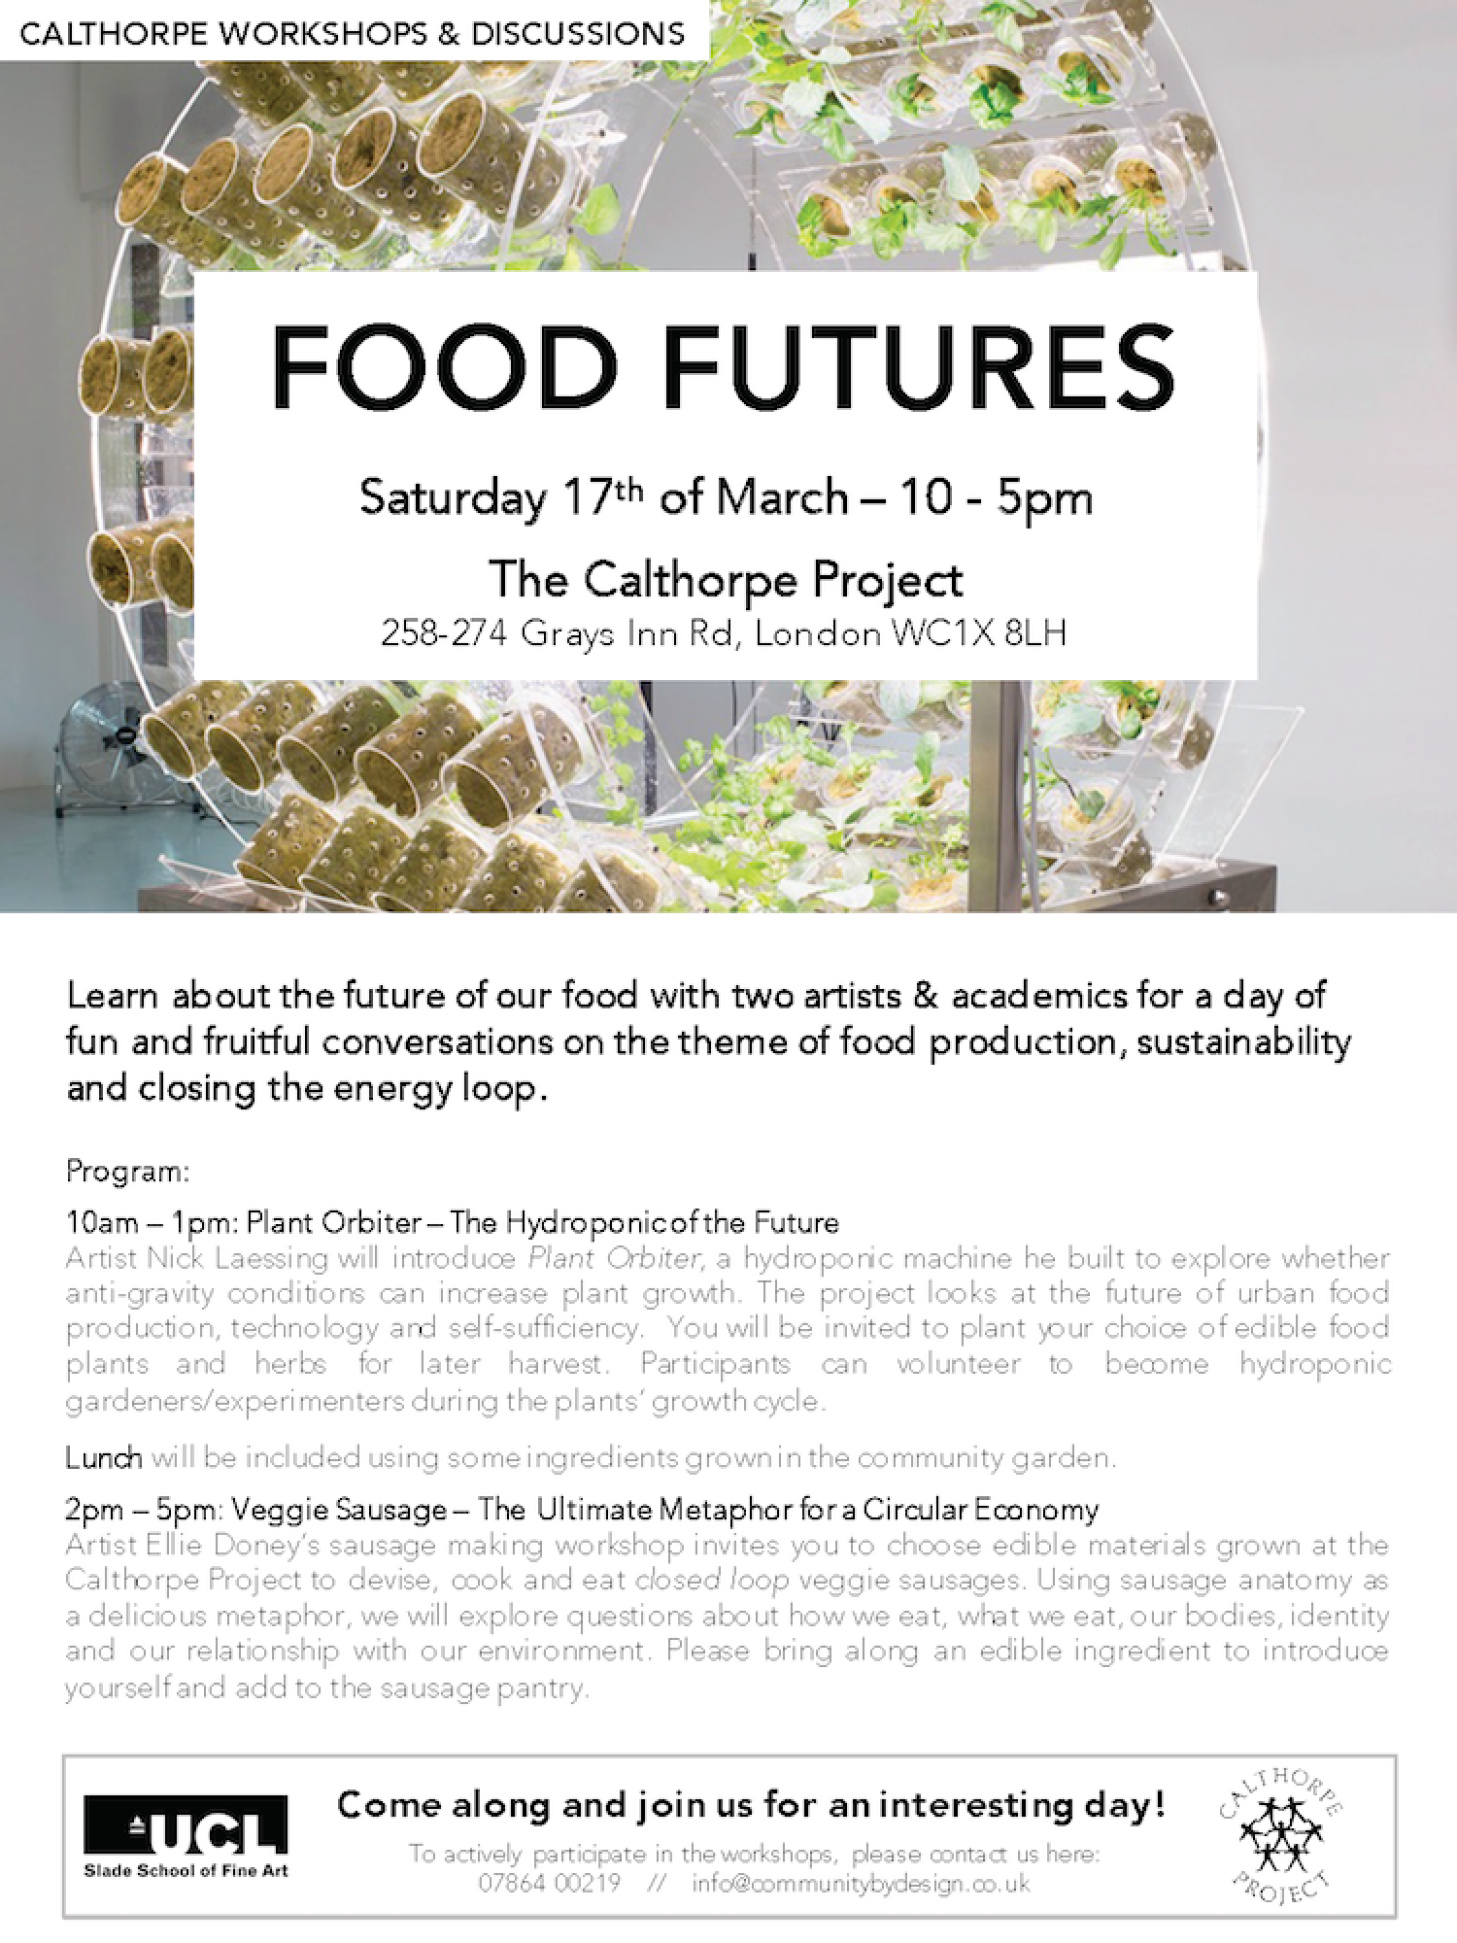 Food Futures - The Calthorpe Project